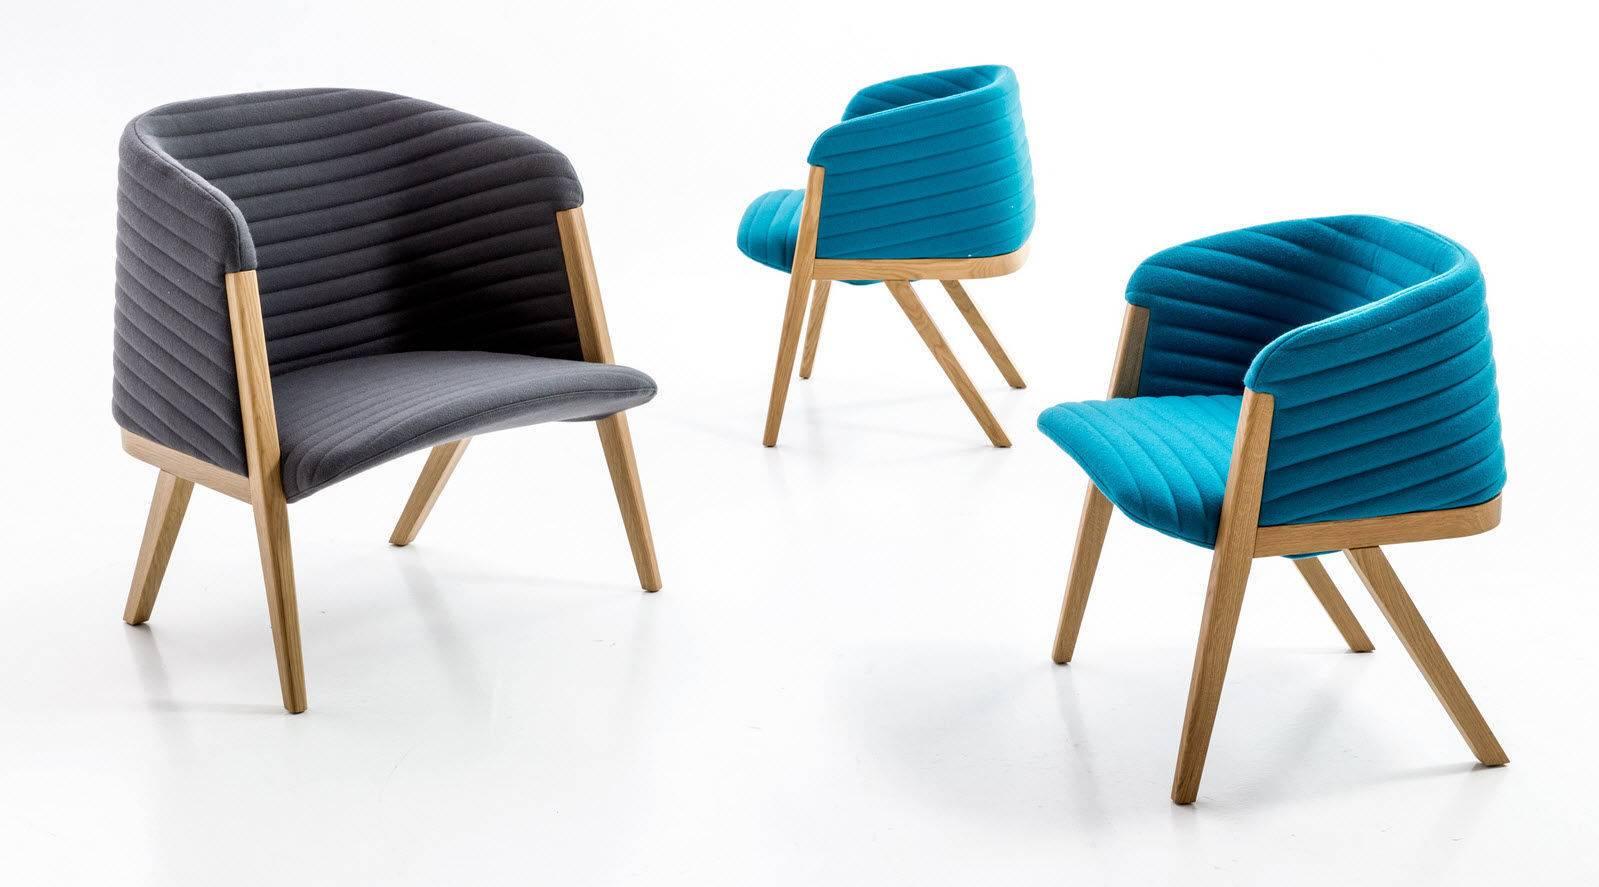 Light and welcoming in shape and character, Mafalda brings together three conceptually distinct components to form a single body: seat, shell and wood base. The result is a distinctive, almost humorous, character. The name is deliberately borrowed